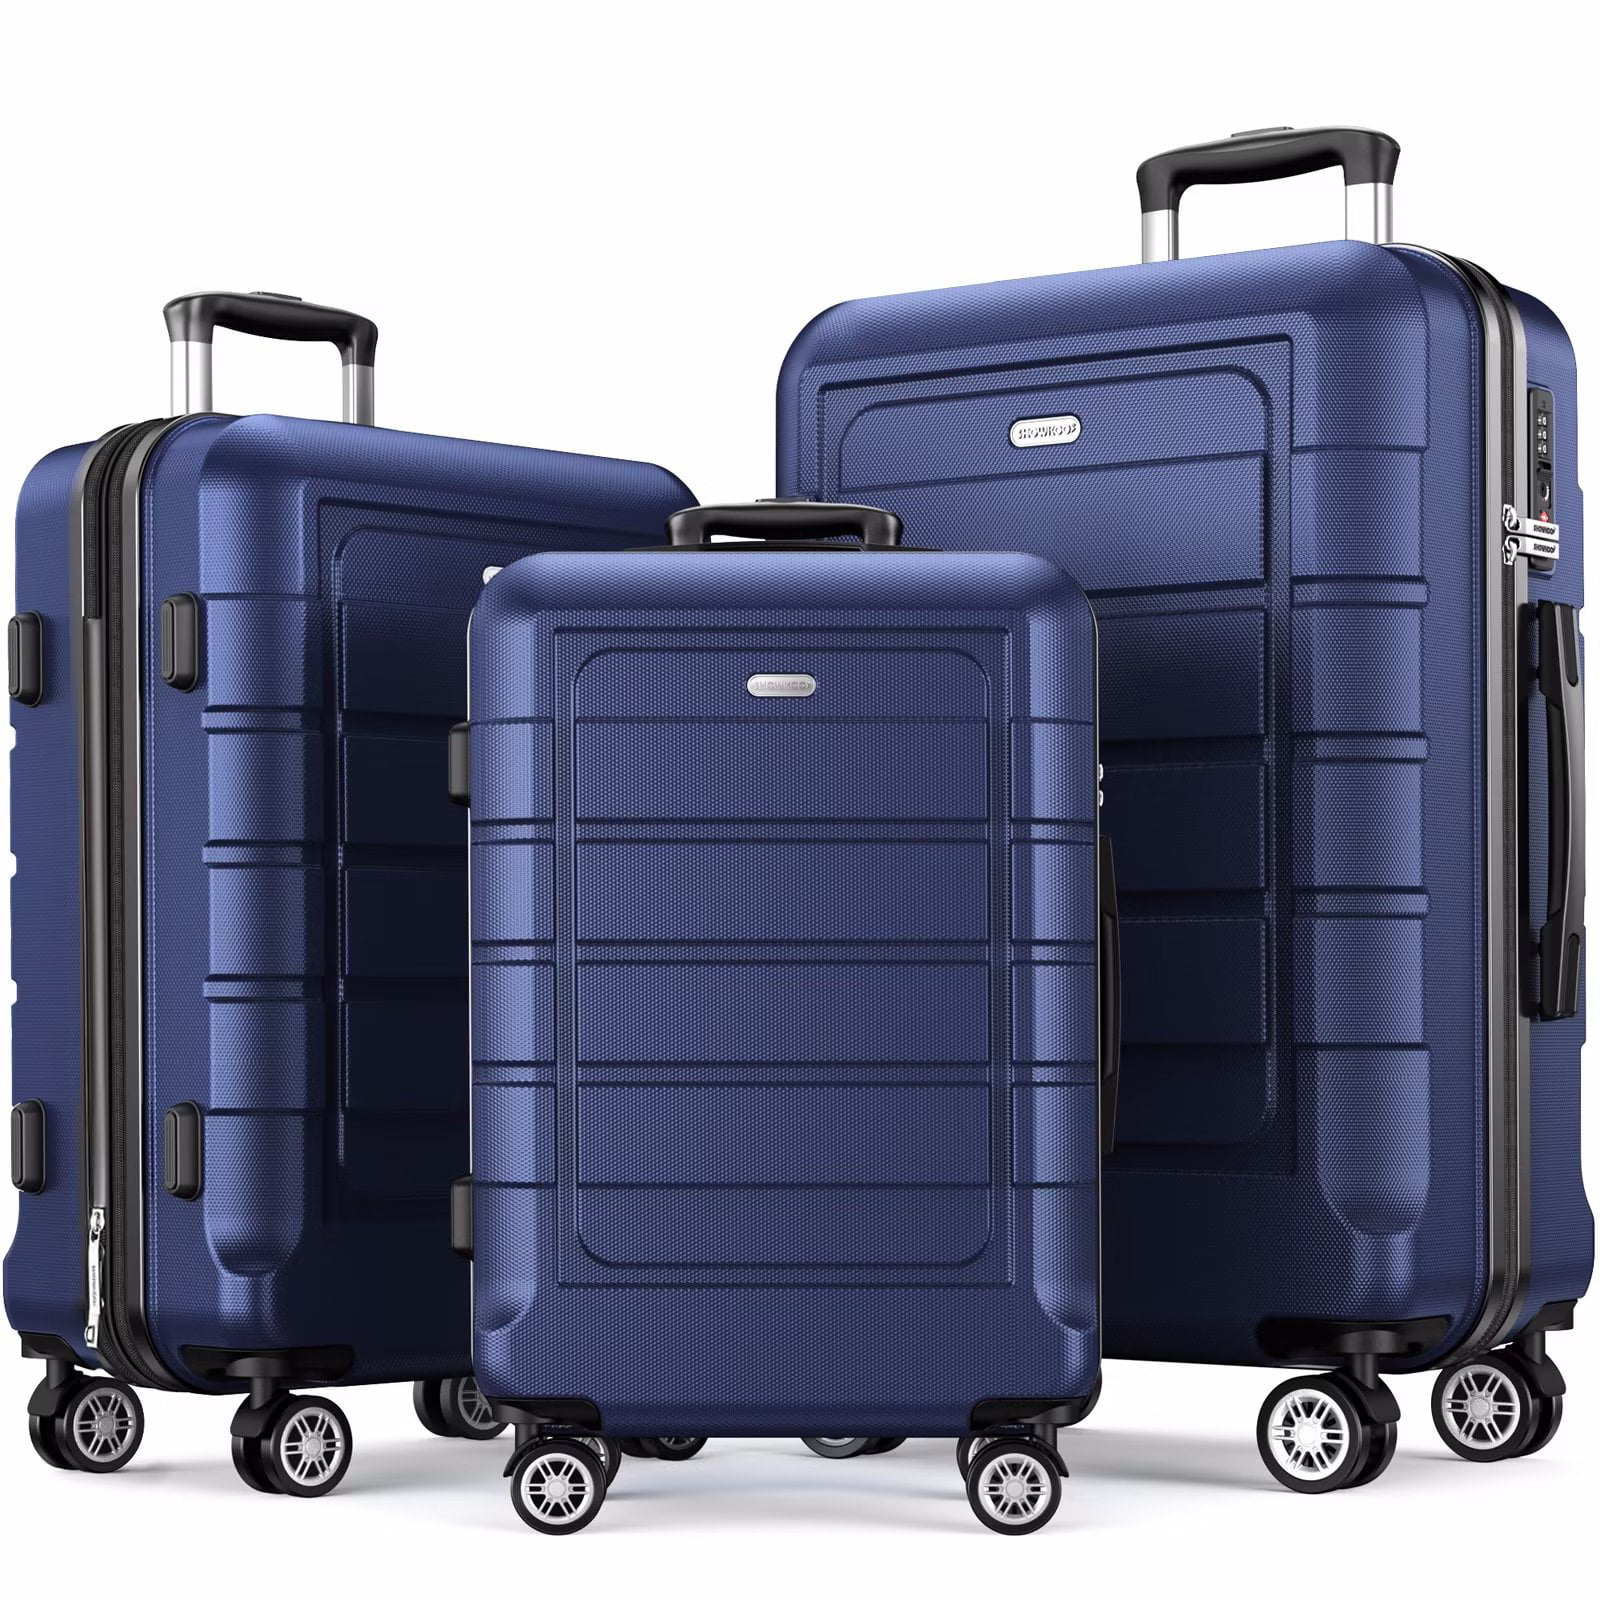 SHOWKOO 3 Piece Luggage Set Expandable ABS Hard Shell luggage Set Double Spinner Wheels Suitcase - image 1 of 9